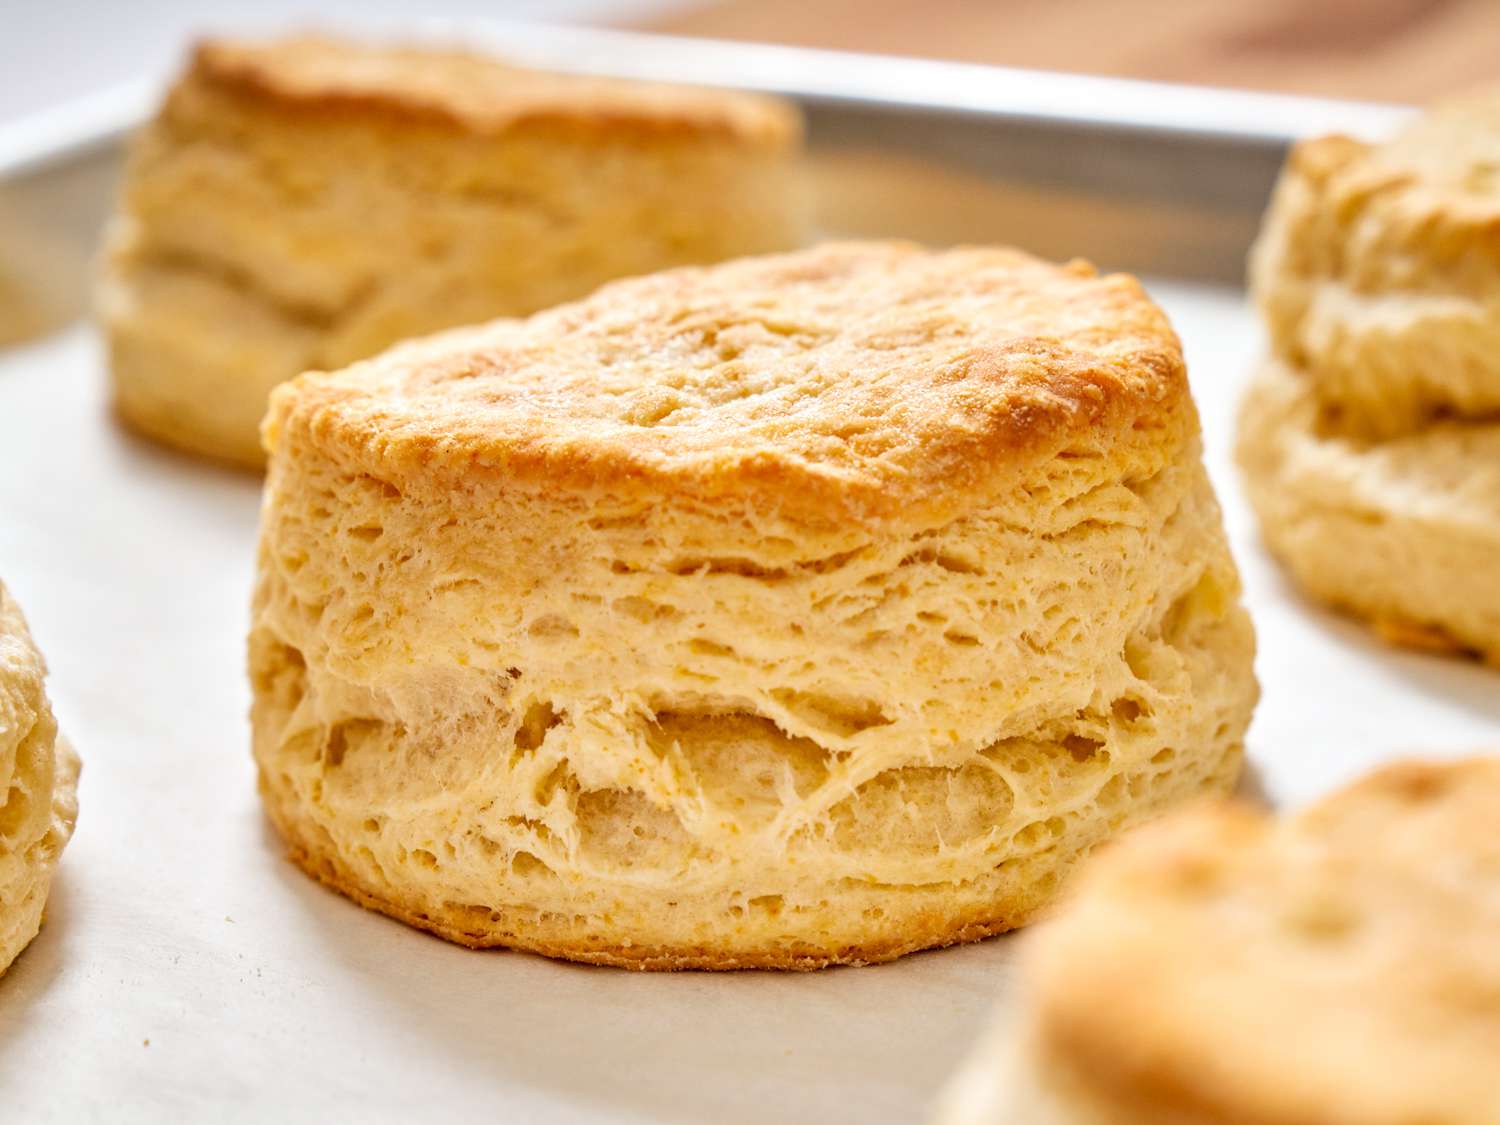 A close up of a freshly baked buttermilk biscuit.